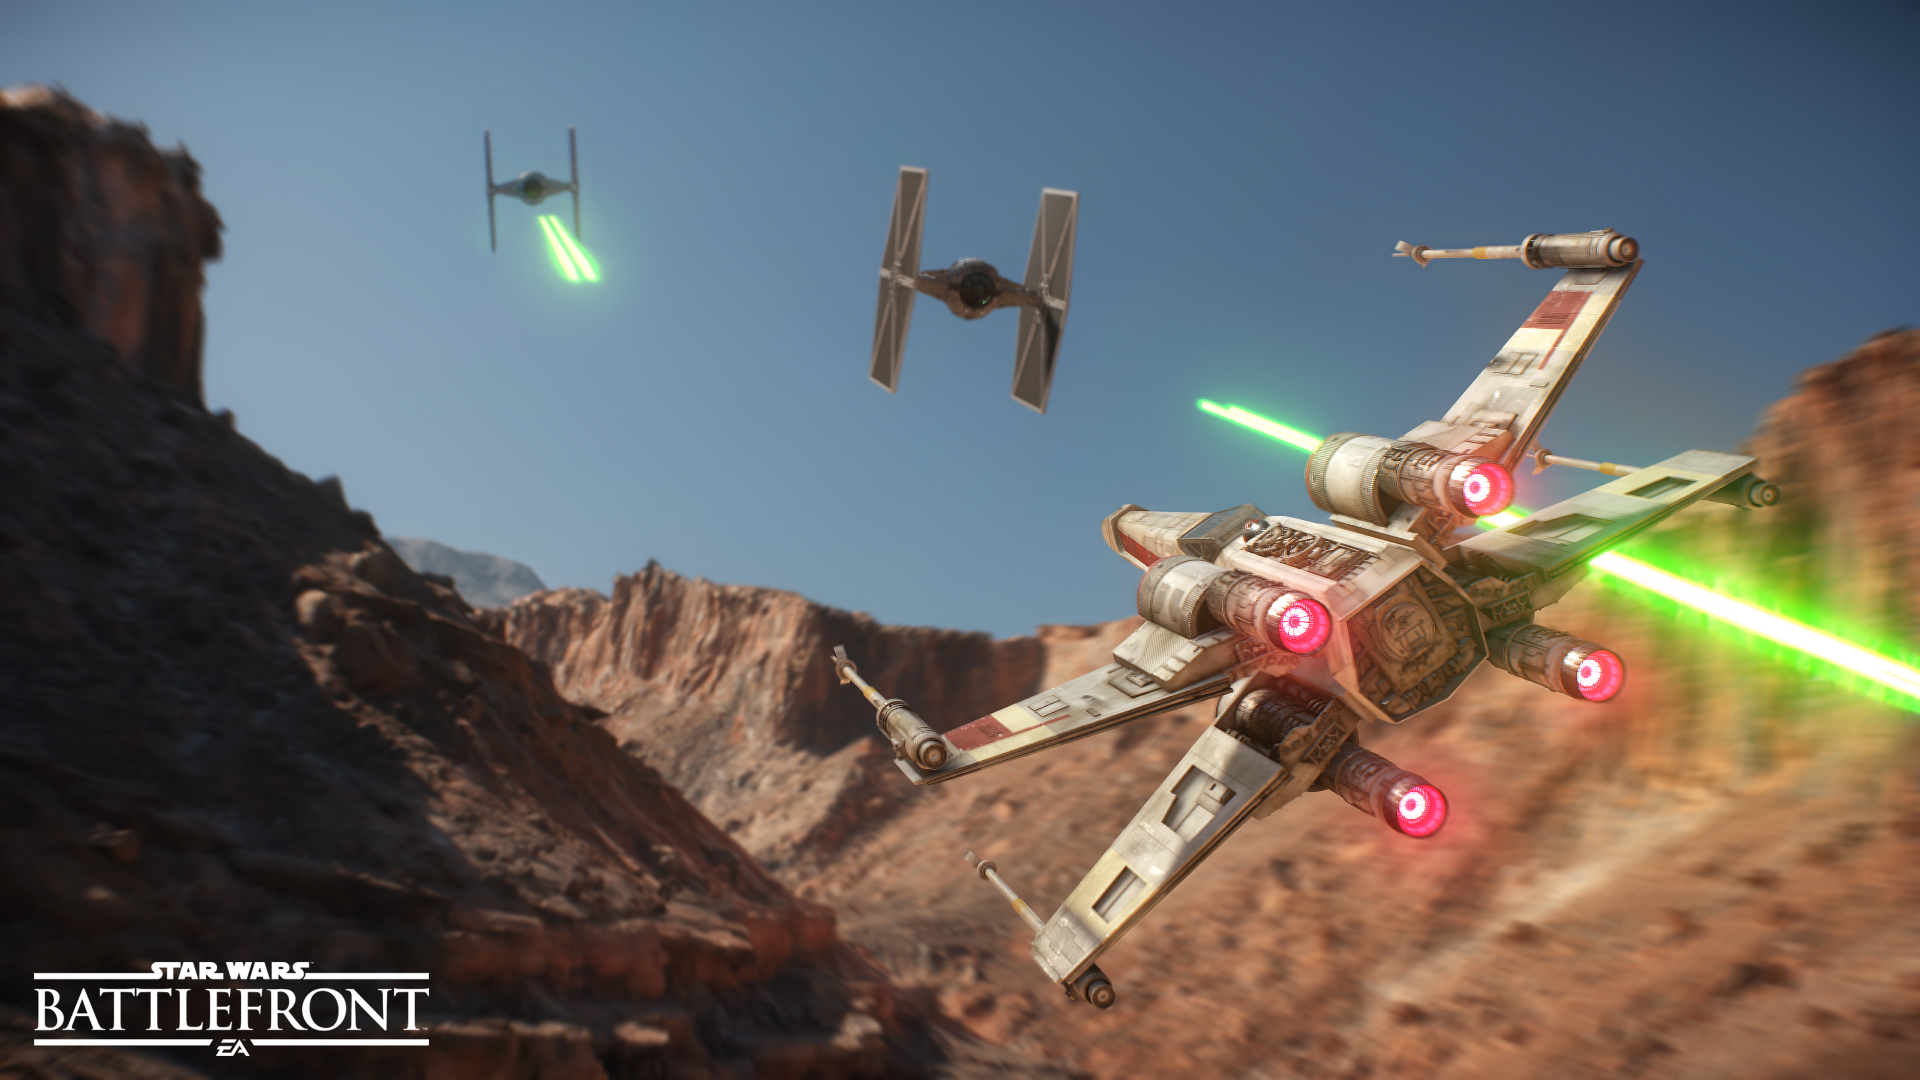 “Star Wars Battlefront” Release Date Officially Revealed - 40-Player Battles, Darth Vader, Free DLC, and More